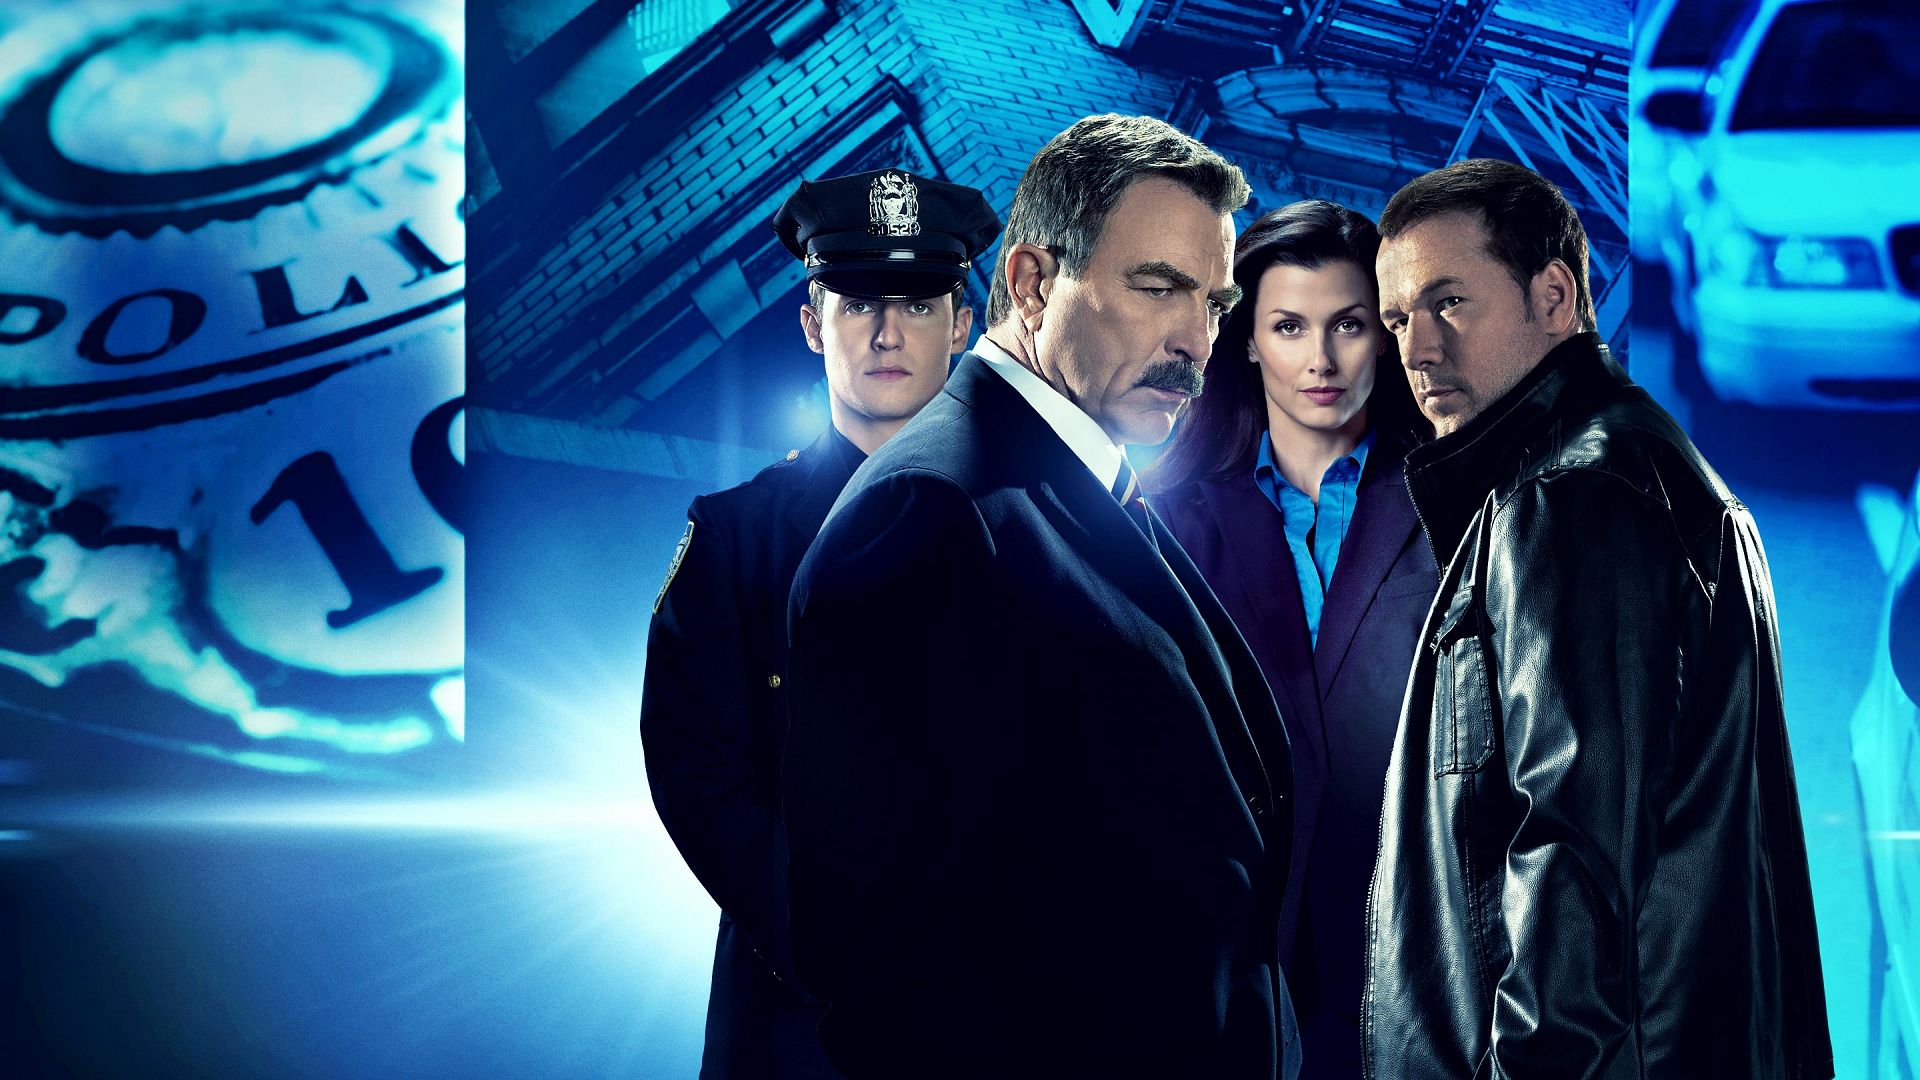 Blue Bloods season 10 release date and cast